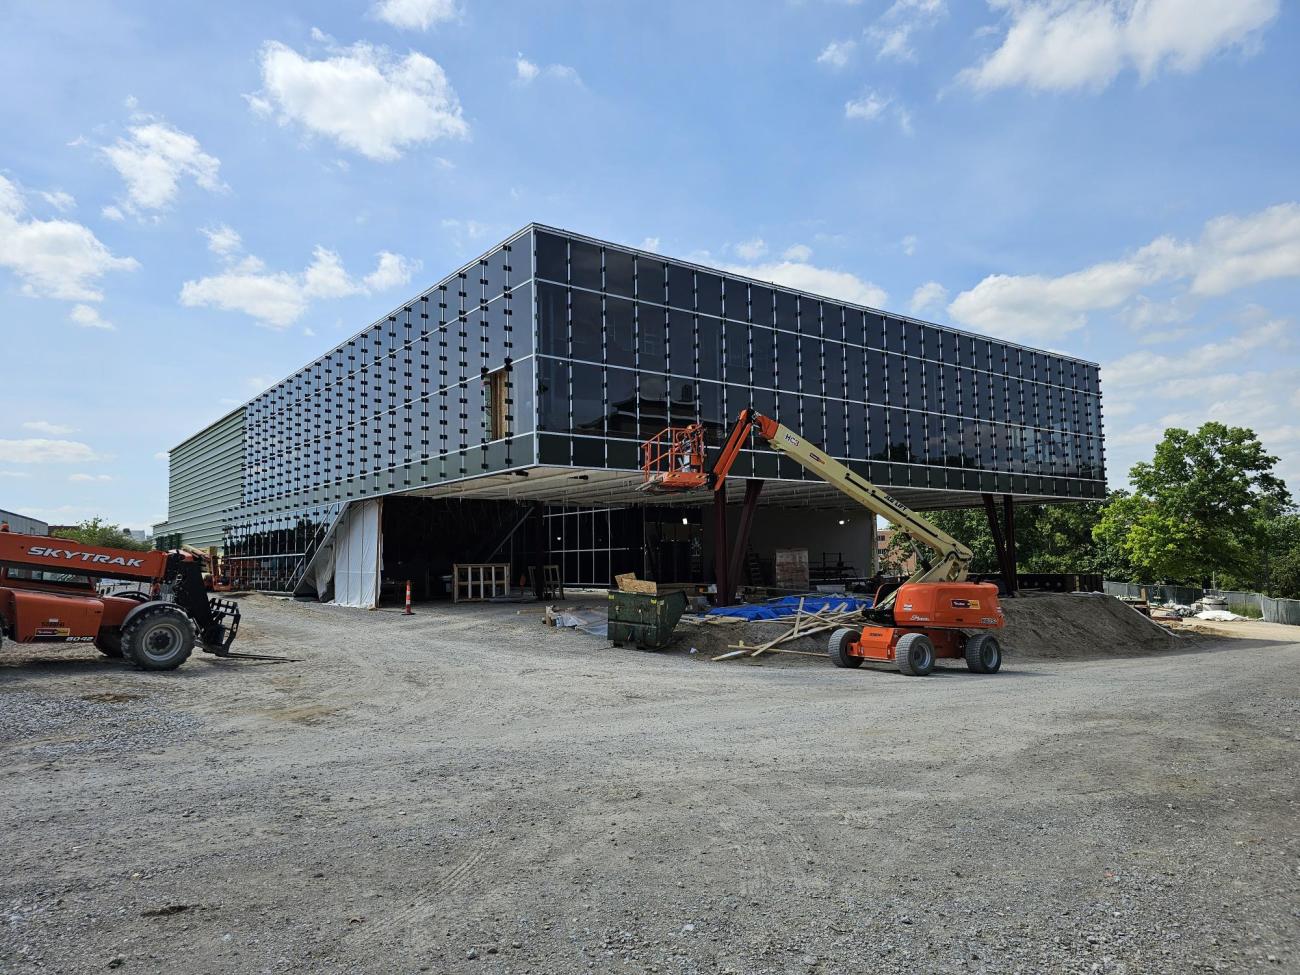 Exterior of the Multicultural Center under construction